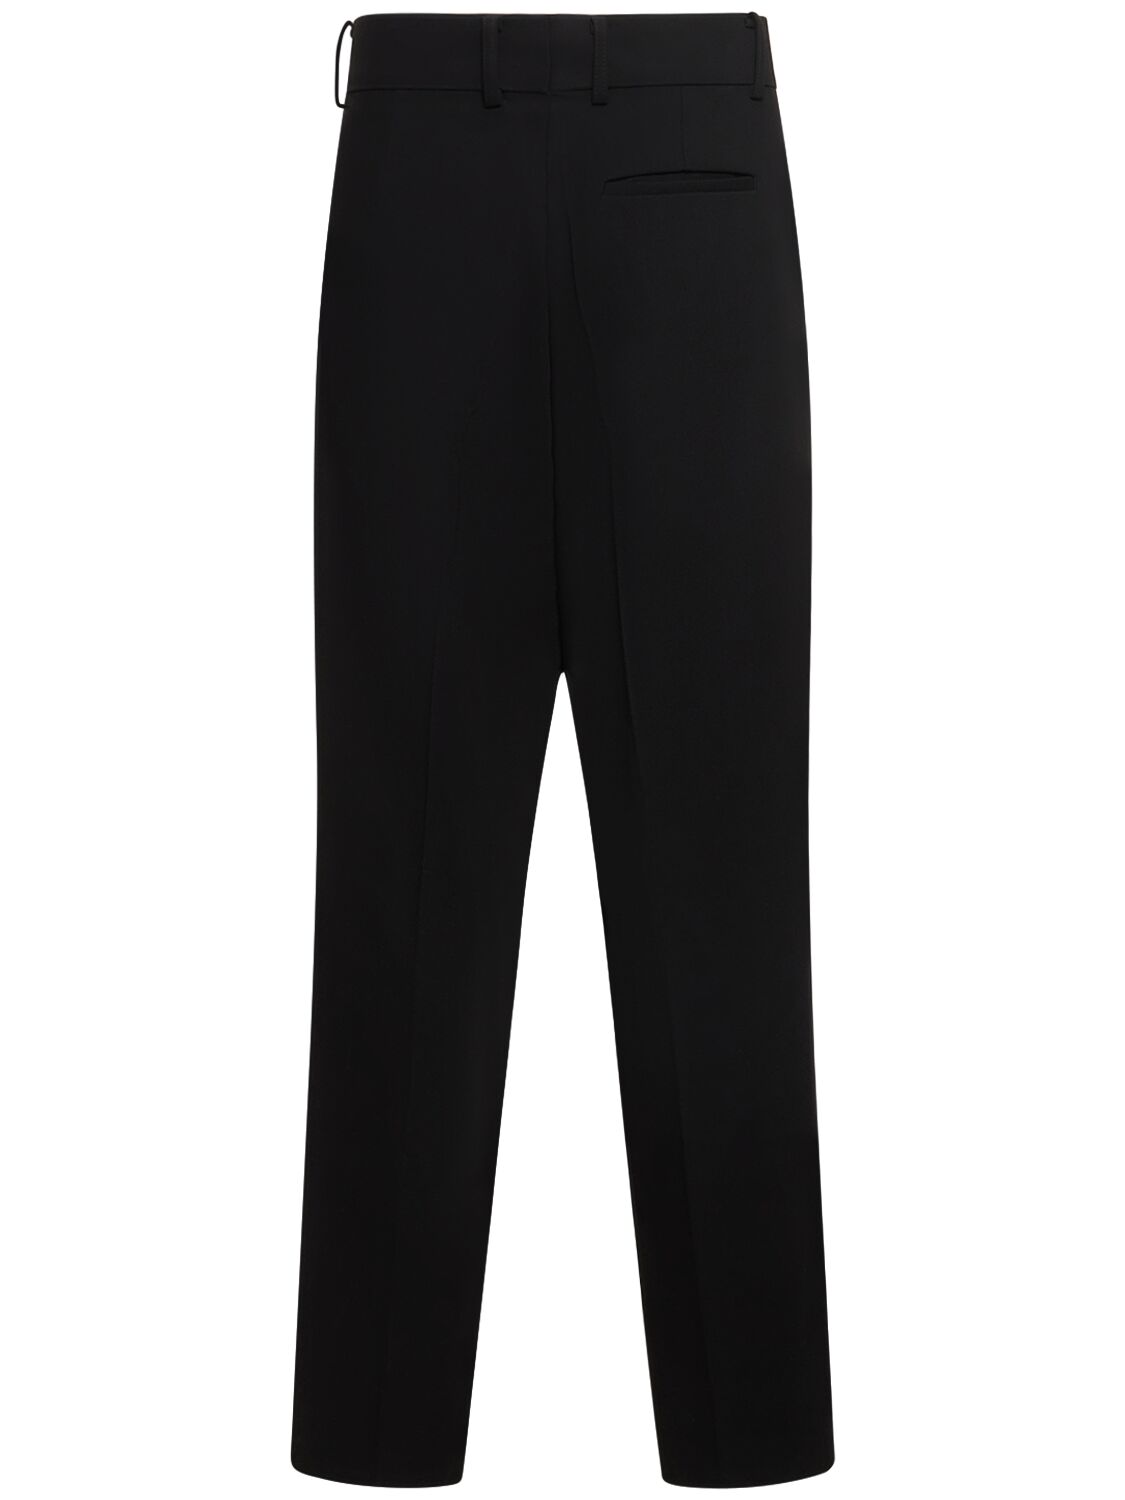 THE FRANKIE SHOP Russel Pleated Pants